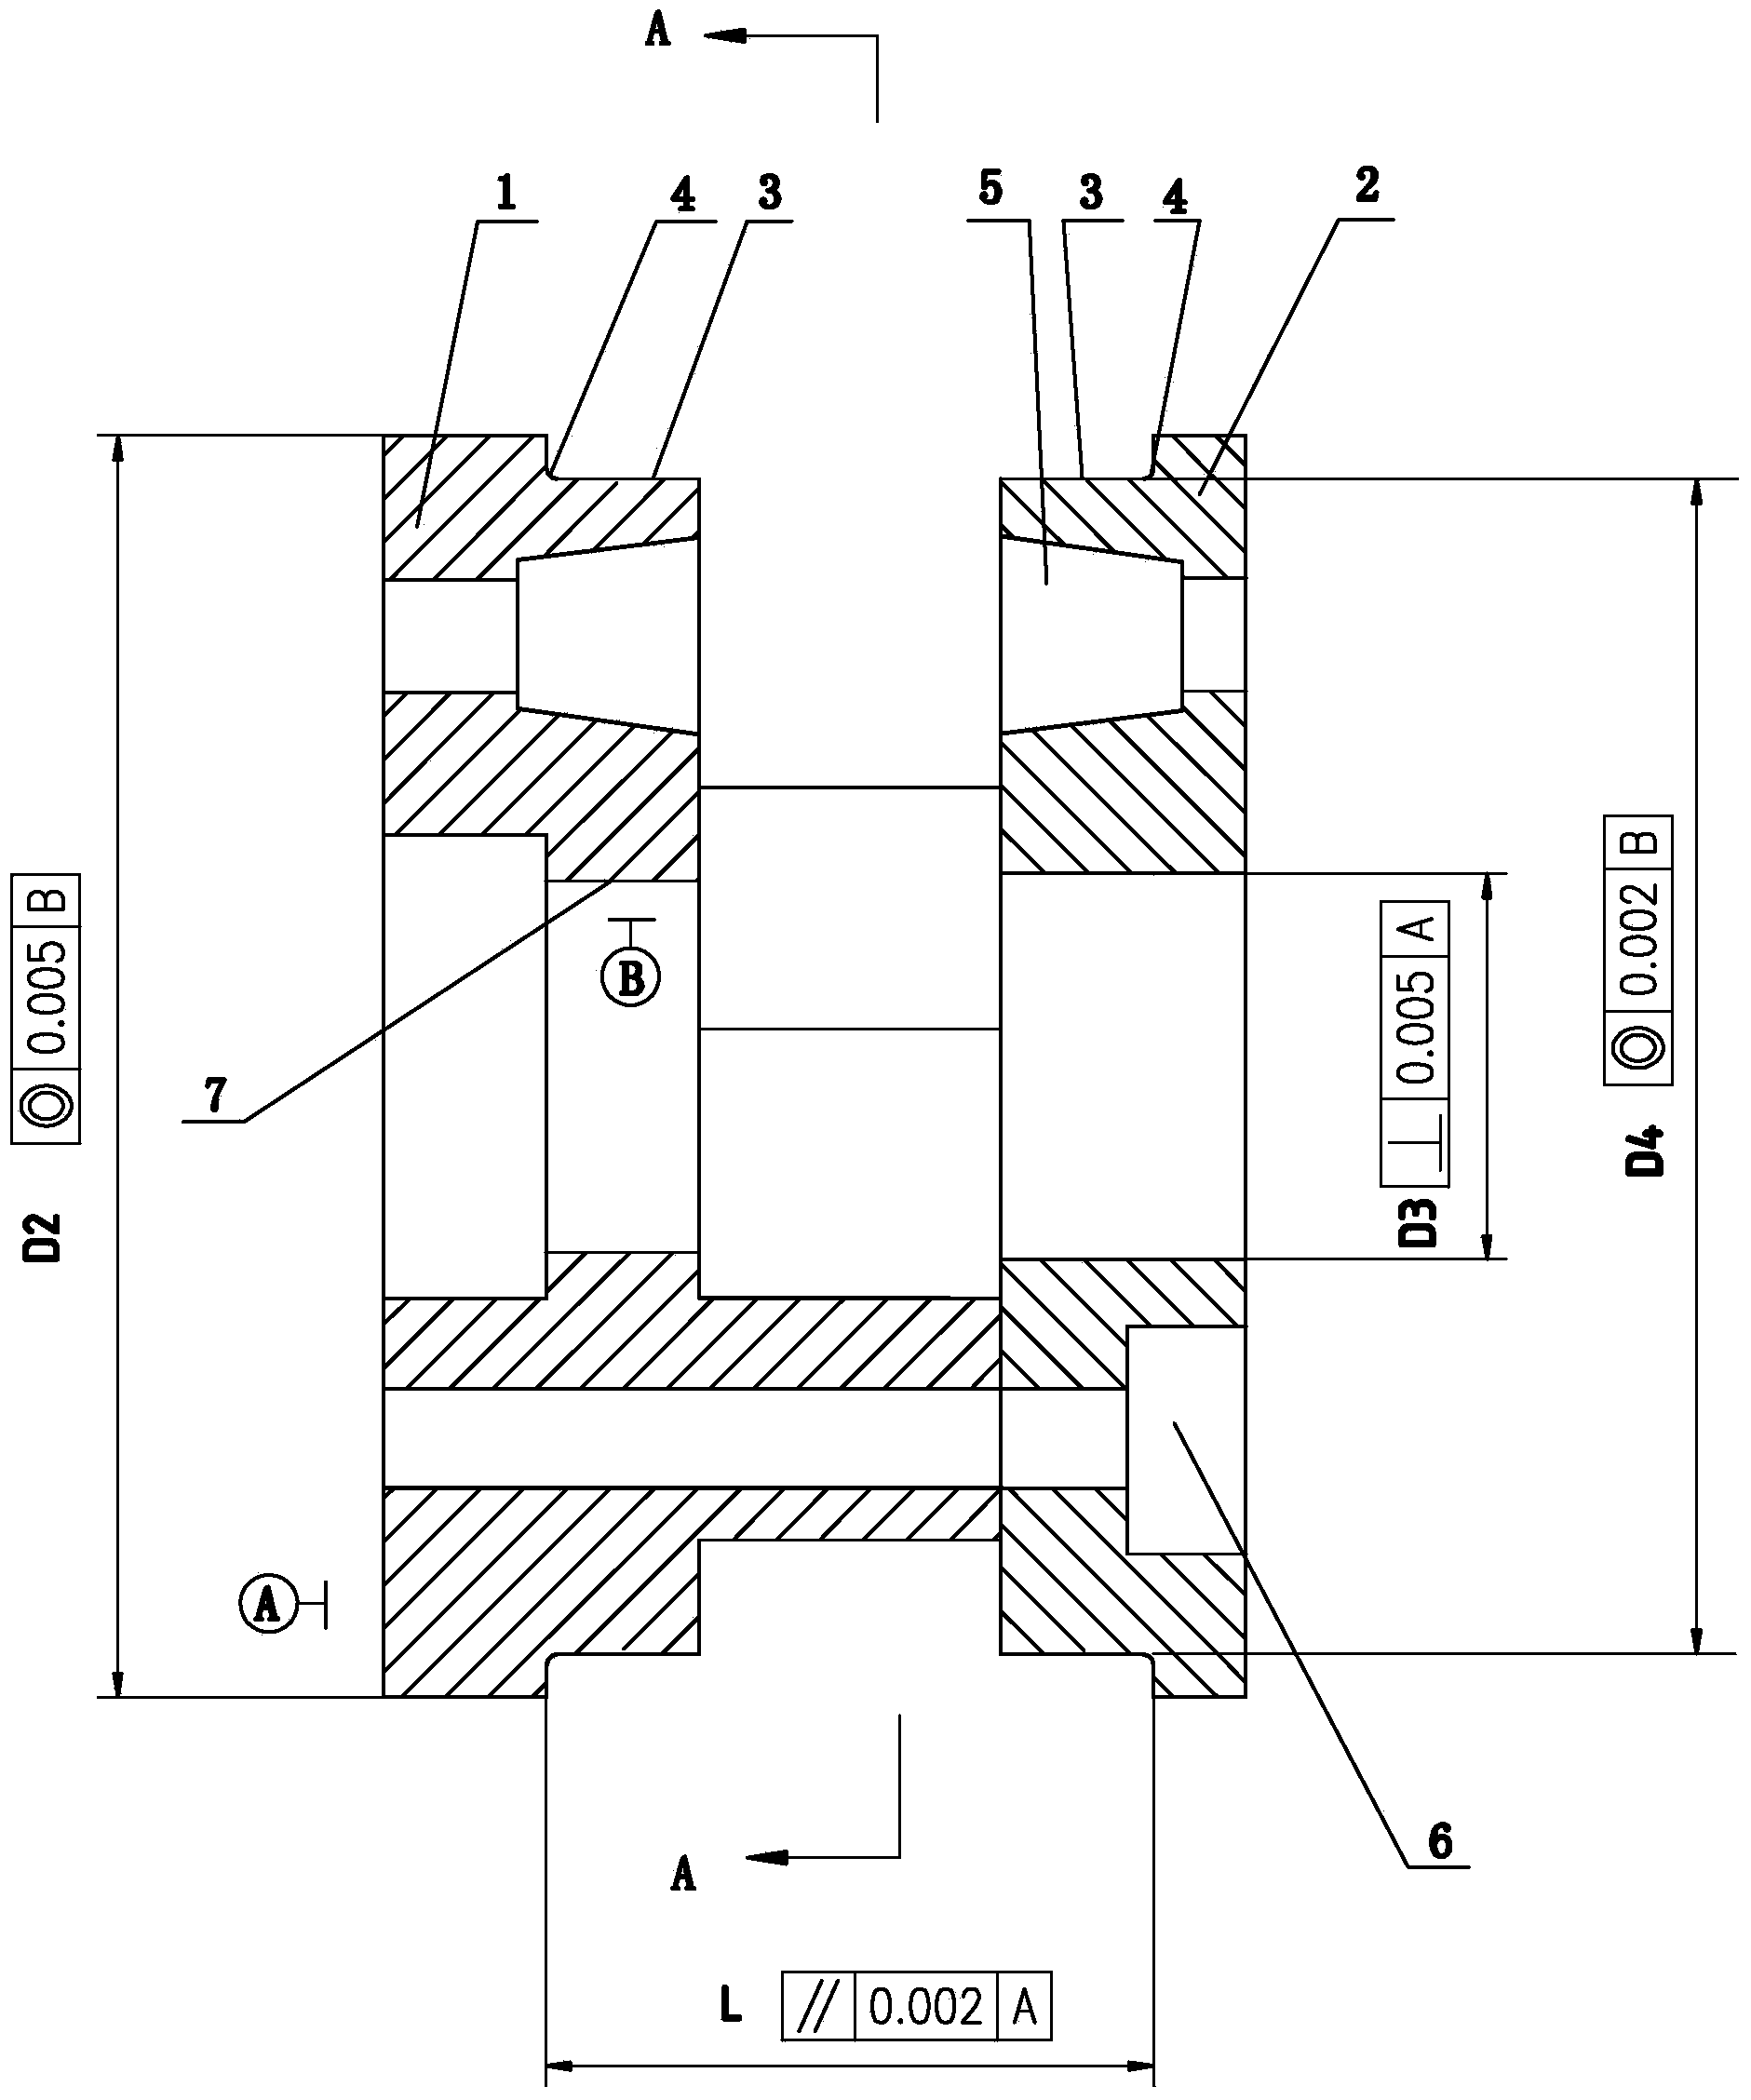 Integrated machining method of planet carrier of robot RV reducer